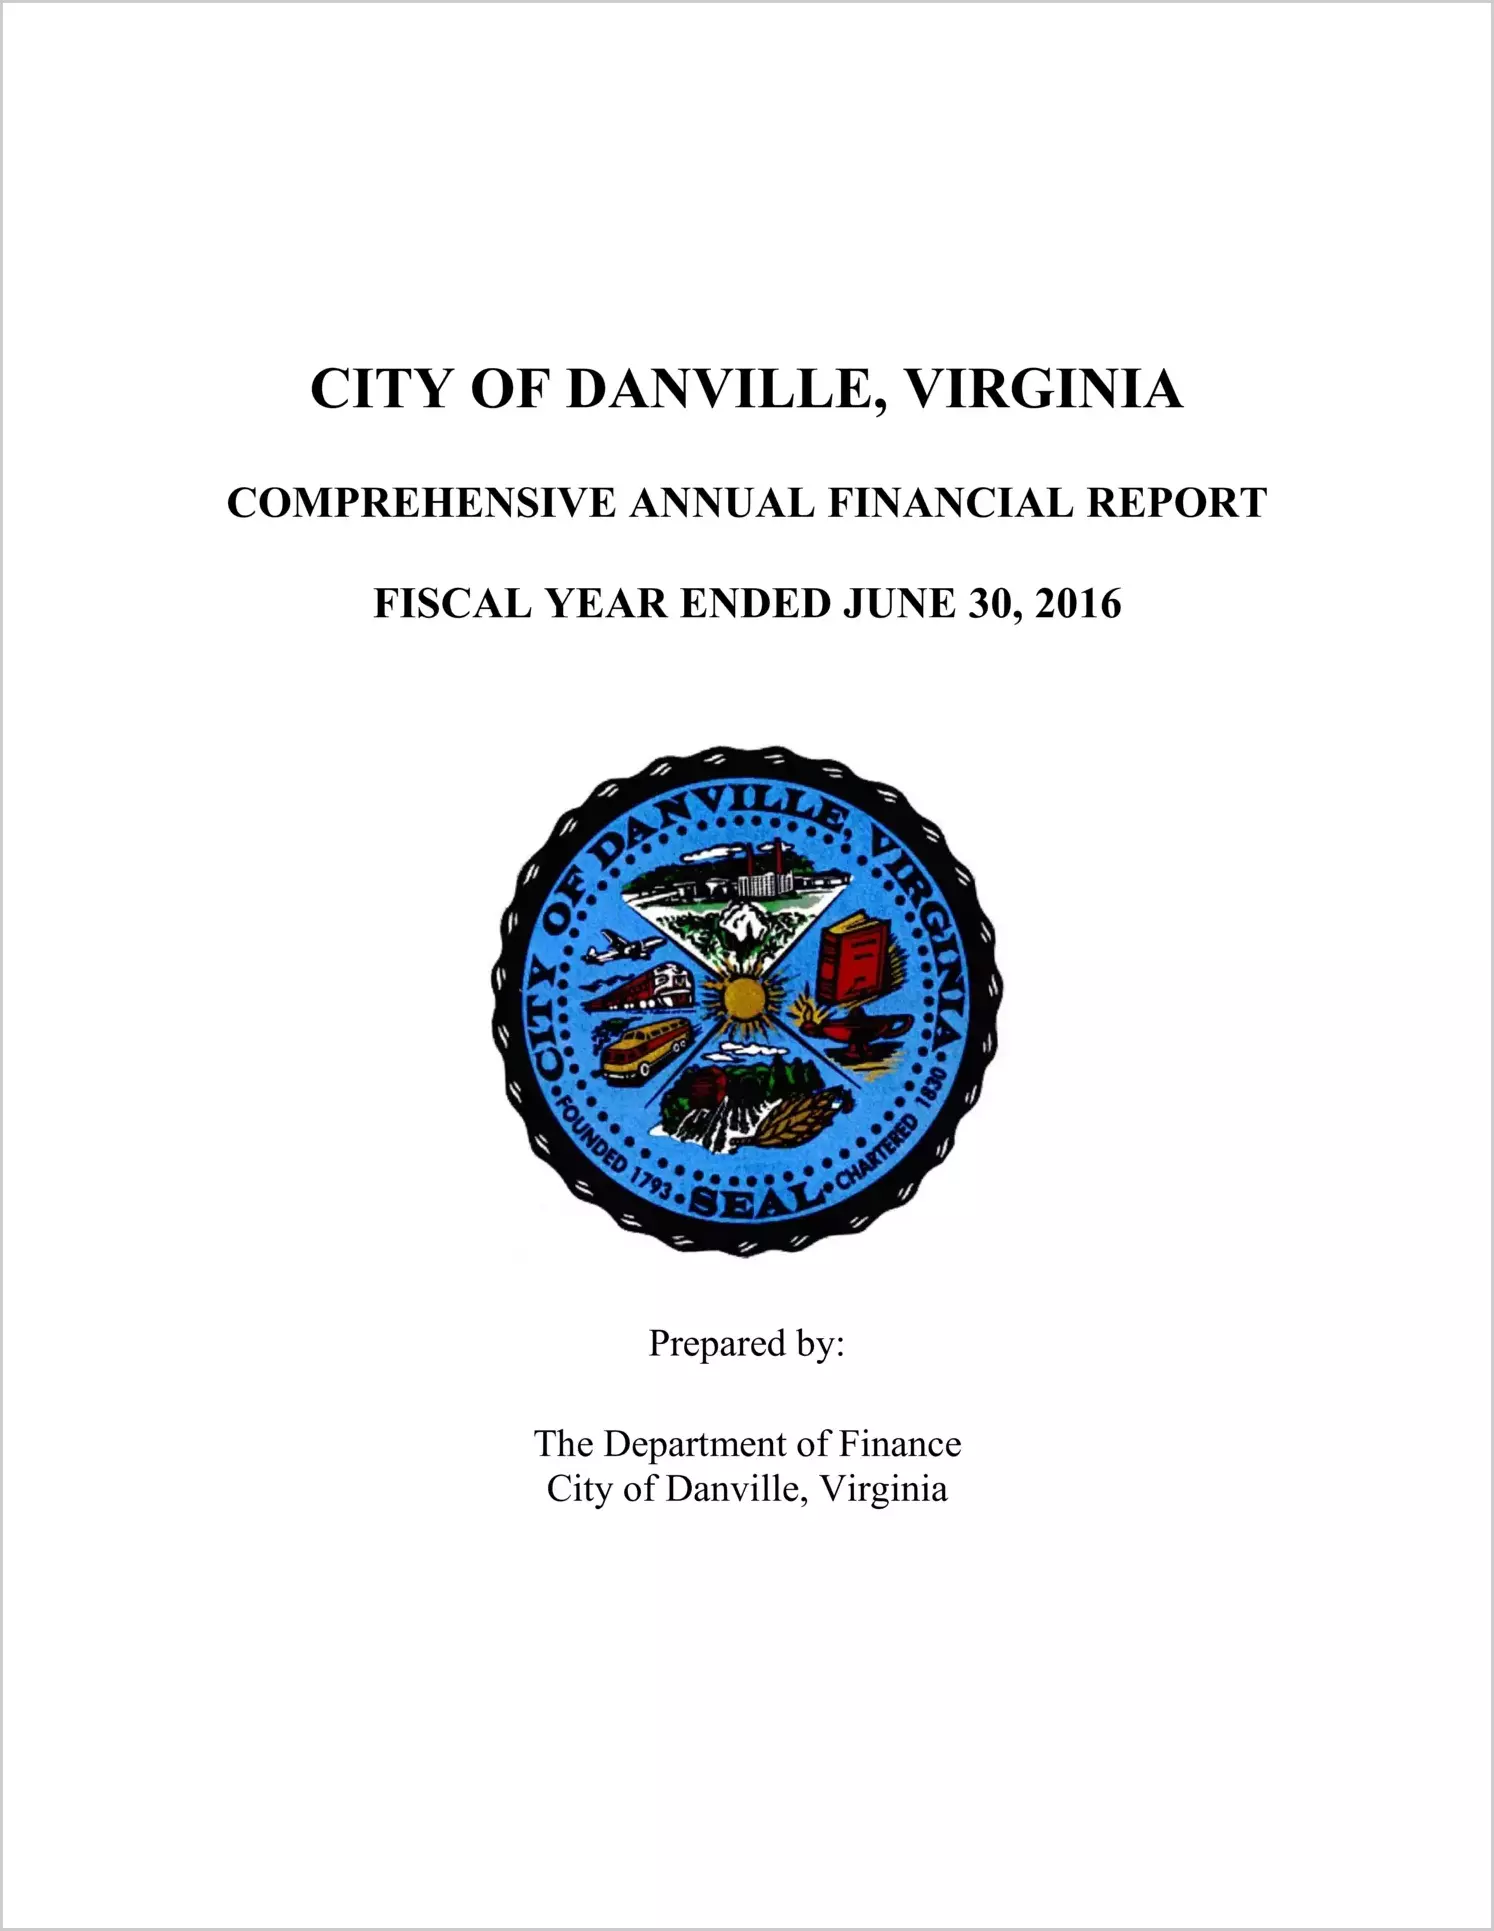 2016 Annual Financial Report for City of Danville